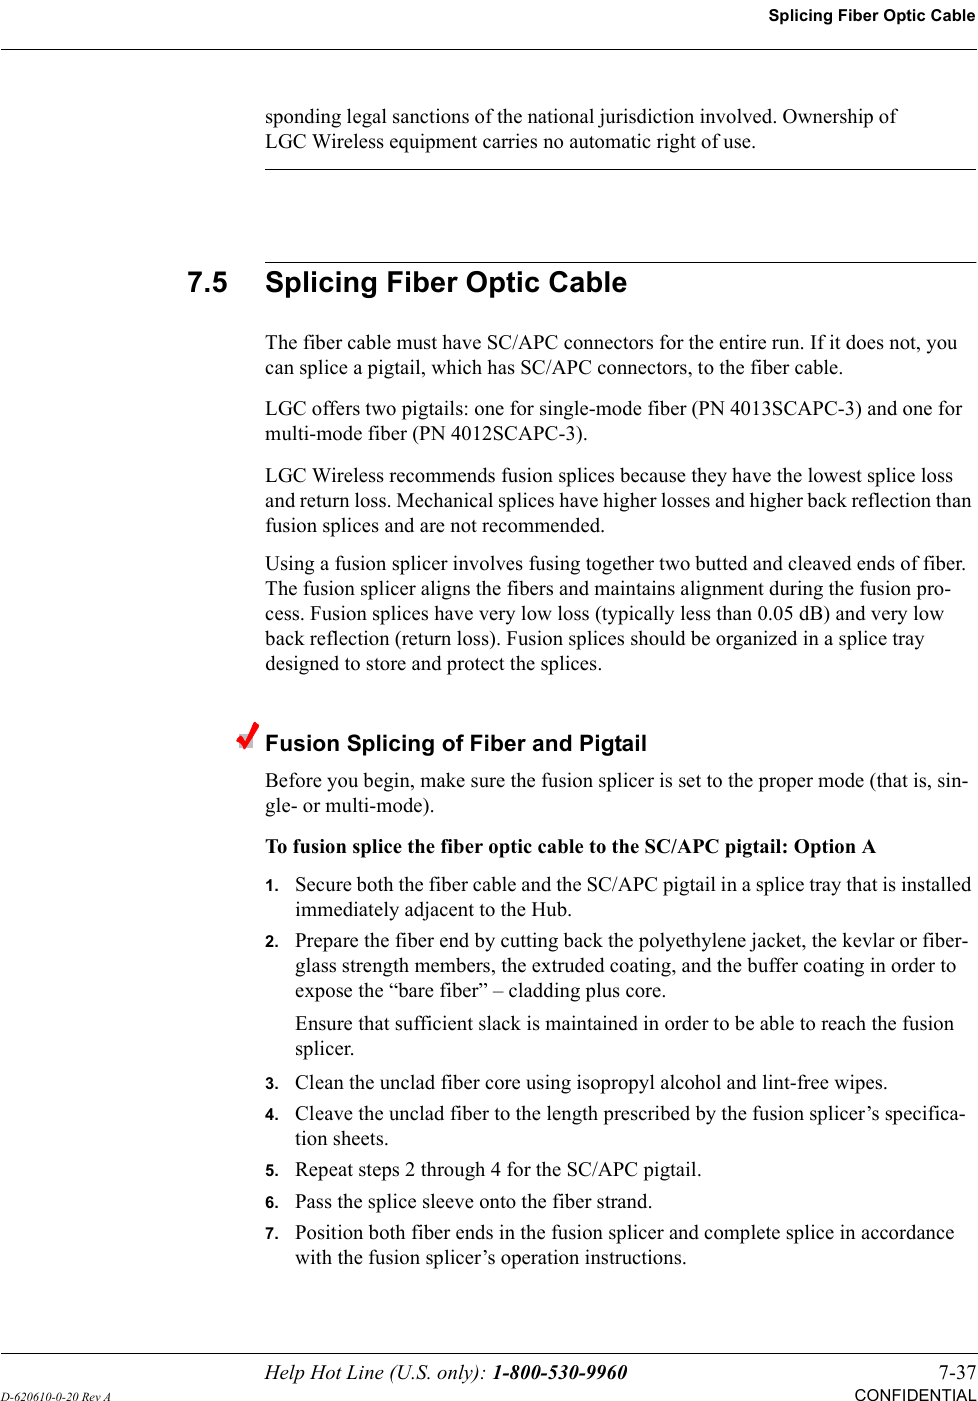 Help Hot Line (U.S. only): 1-800-530-9960 7-37D-620610-0-20 Rev ACONFIDENTIALSplicing Fiber Optic Cablesponding legal sanctions of the national jurisdiction involved. Ownership of LGC Wireless equipment carries no automatic right of use. 7.5 Splicing Fiber Optic CableThe fiber cable must have SC/APC connectors for the entire run. If it does not, you can splice a pigtail, which has SC/APC connectors, to the fiber cable.LGC offers two pigtails: one for single-mode fiber (PN 4013SCAPC-3) and one for multi-mode fiber (PN 4012SCAPC-3).LGC Wireless recommends fusion splices because they have the lowest splice loss and return loss. Mechanical splices have higher losses and higher back reflection than fusion splices and are not recommended.Using a fusion splicer involves fusing together two butted and cleaved ends of fiber. The fusion splicer aligns the fibers and maintains alignment during the fusion pro-cess. Fusion splices have very low loss (typically less than 0.05 dB) and very low back reflection (return loss). Fusion splices should be organized in a splice tray designed to store and protect the splices.Fusion Splicing of Fiber and PigtailBefore you begin, make sure the fusion splicer is set to the proper mode (that is, sin-gle- or multi-mode).To fusion splice the fiber optic cable to the SC/APC pigtail: Option A1.Secure both the fiber cable and the SC/APC pigtail in a splice tray that is installed immediately adjacent to the Hub.2.Prepare the fiber end by cutting back the polyethylene jacket, the kevlar or fiber-glass strength members, the extruded coating, and the buffer coating in order to expose the “bare fiber” – cladding plus core.Ensure that sufficient slack is maintained in order to be able to reach the fusion splicer.3.Clean the unclad fiber core using isopropyl alcohol and lint-free wipes.4.Cleave the unclad fiber to the length prescribed by the fusion splicer’s specifica-tion sheets.5.Repeat steps 2 through 4 for the SC/APC pigtail.6.Pass the splice sleeve onto the fiber strand.7.Position both fiber ends in the fusion splicer and complete splice in accordance with the fusion splicer’s operation instructions.